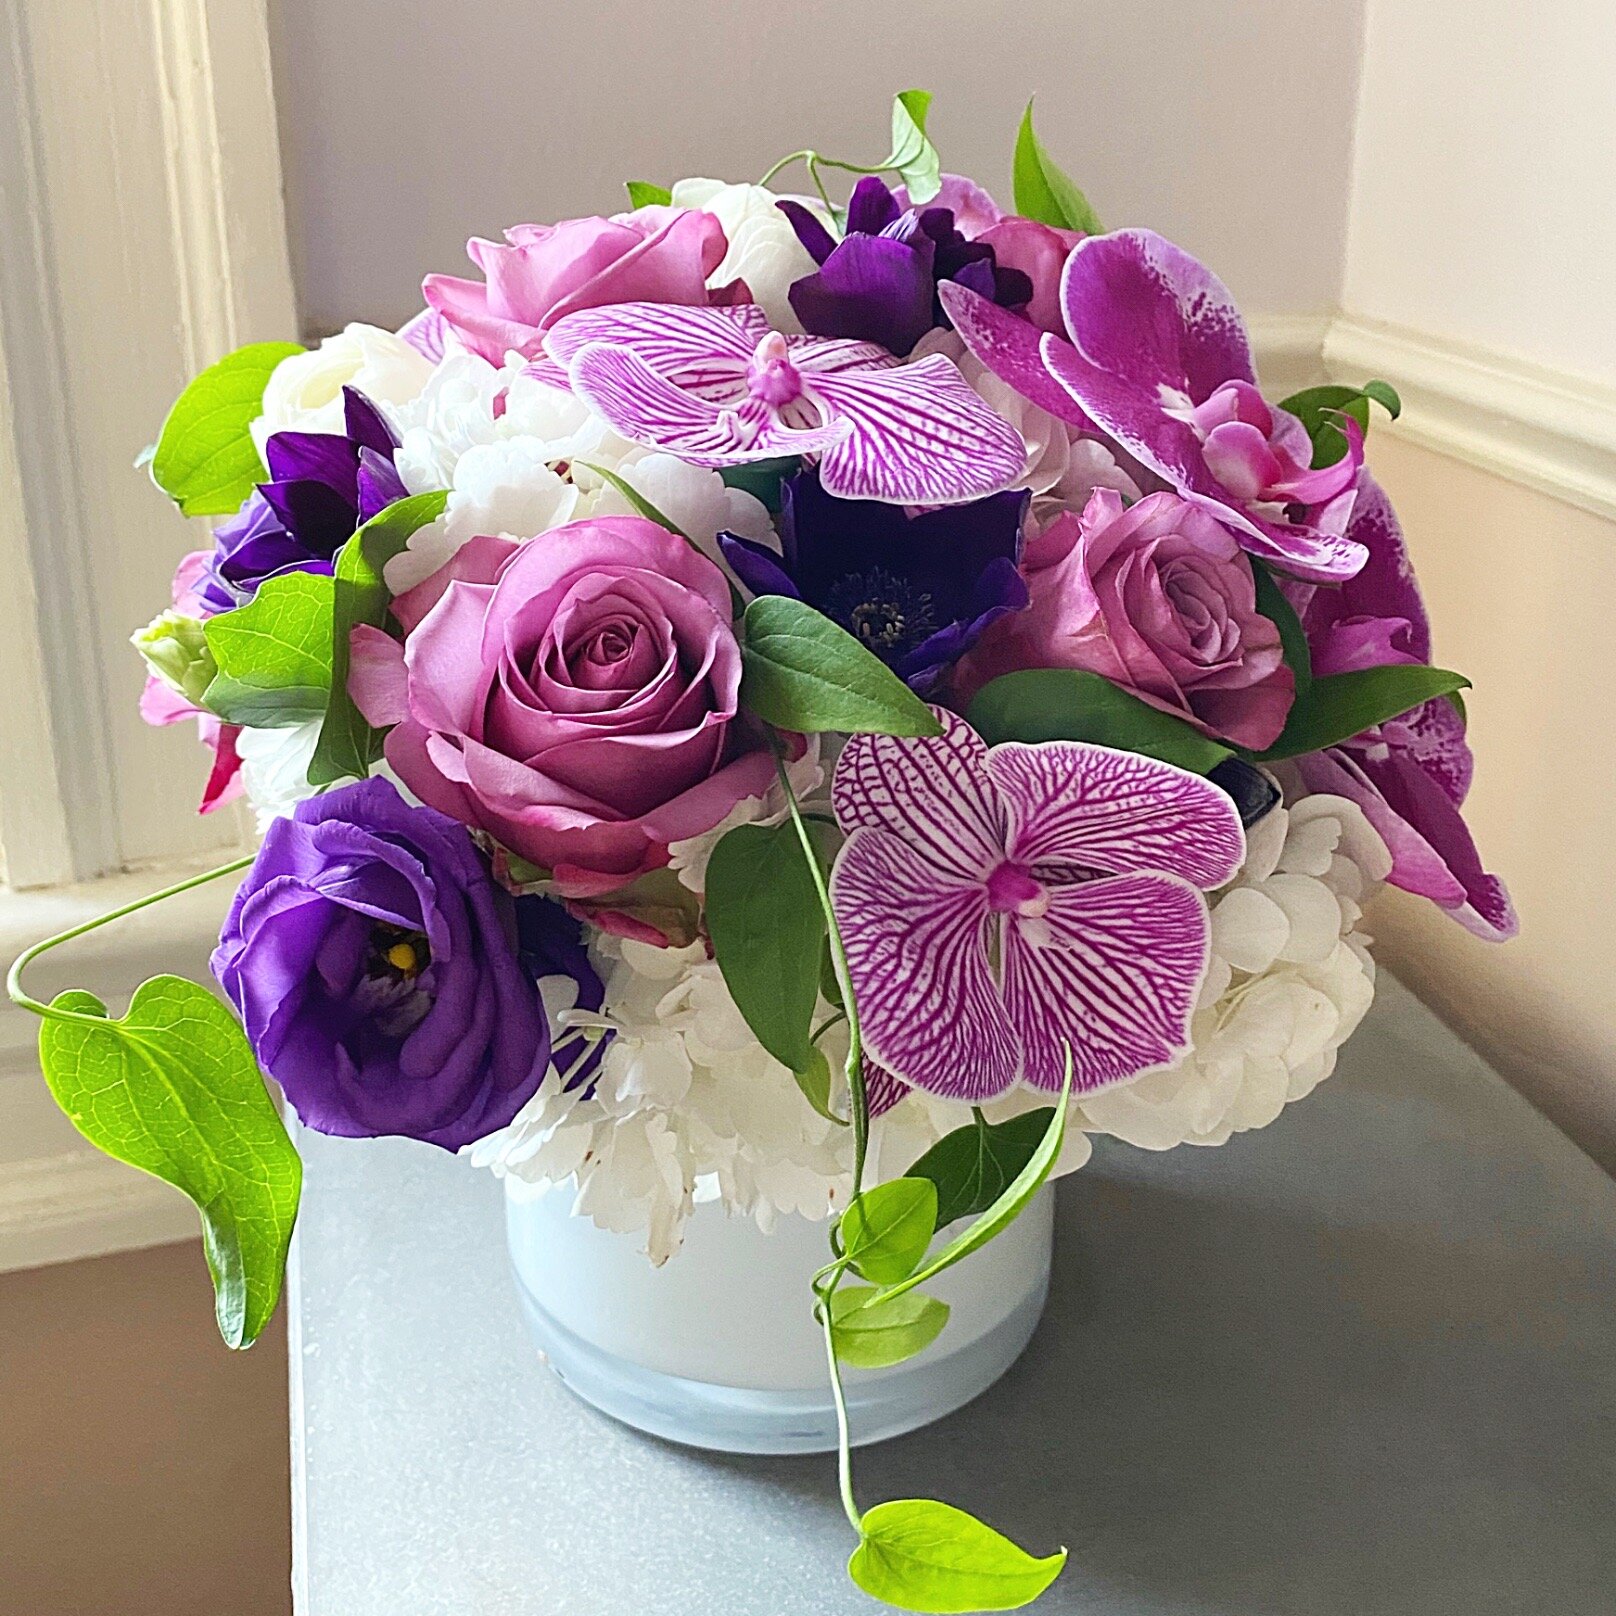 Purple and White Flowers - Atelier Ashley Flowers